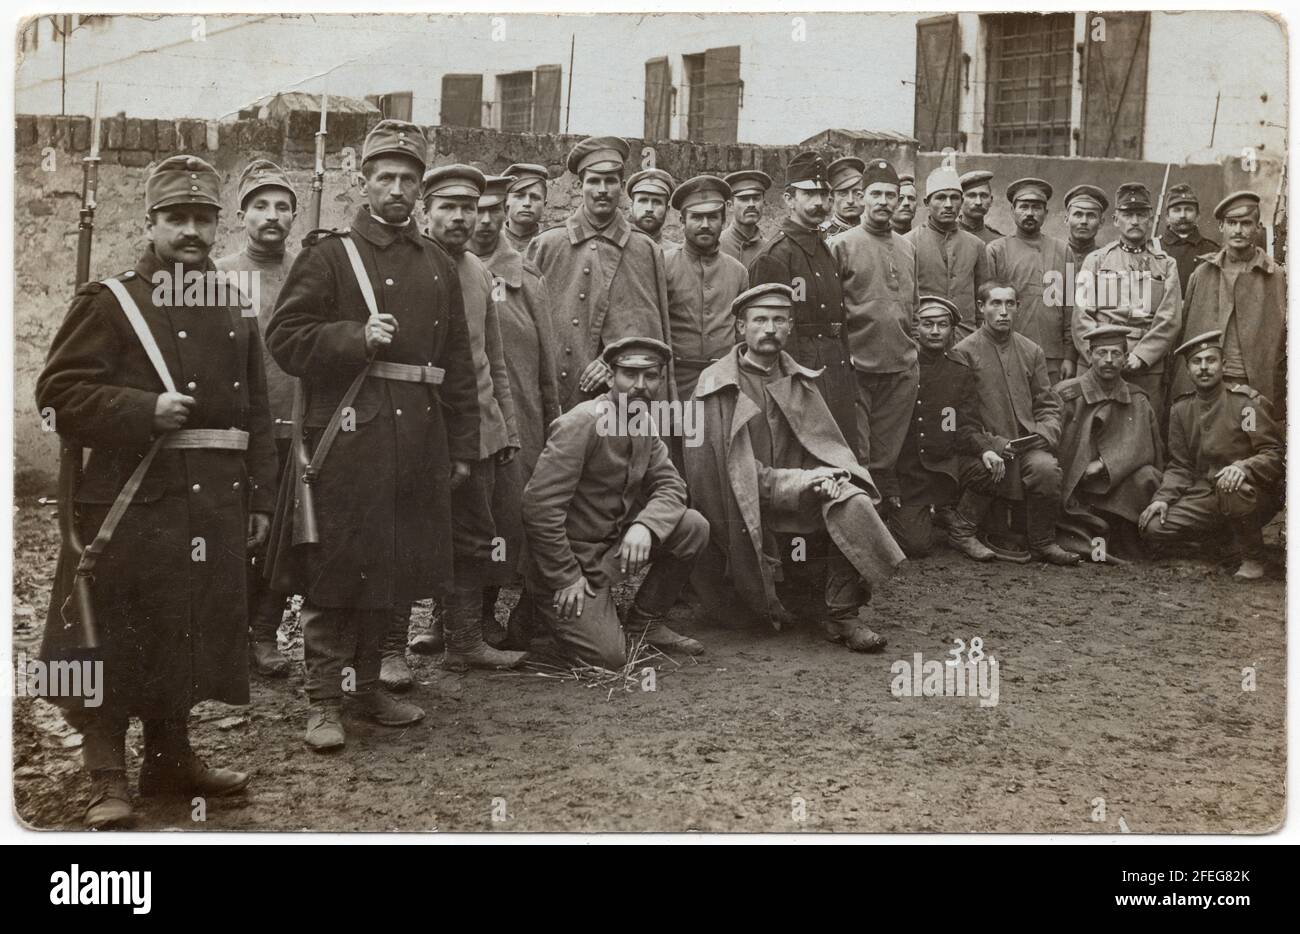 Russian prisoners of war guarded by Austro-Hungarian escort soldiers pictured during the First World War probably in the Austro-Hungarian POW Camp Josefstadt (now Josefov near Jaroměř in Central Bohemia, Czech Republic) depicted in the black and white vintage photograph by an unknown photographer dated from 1914 to 1918. Courtesy of the Azoor Photo Collection. Stock Photo